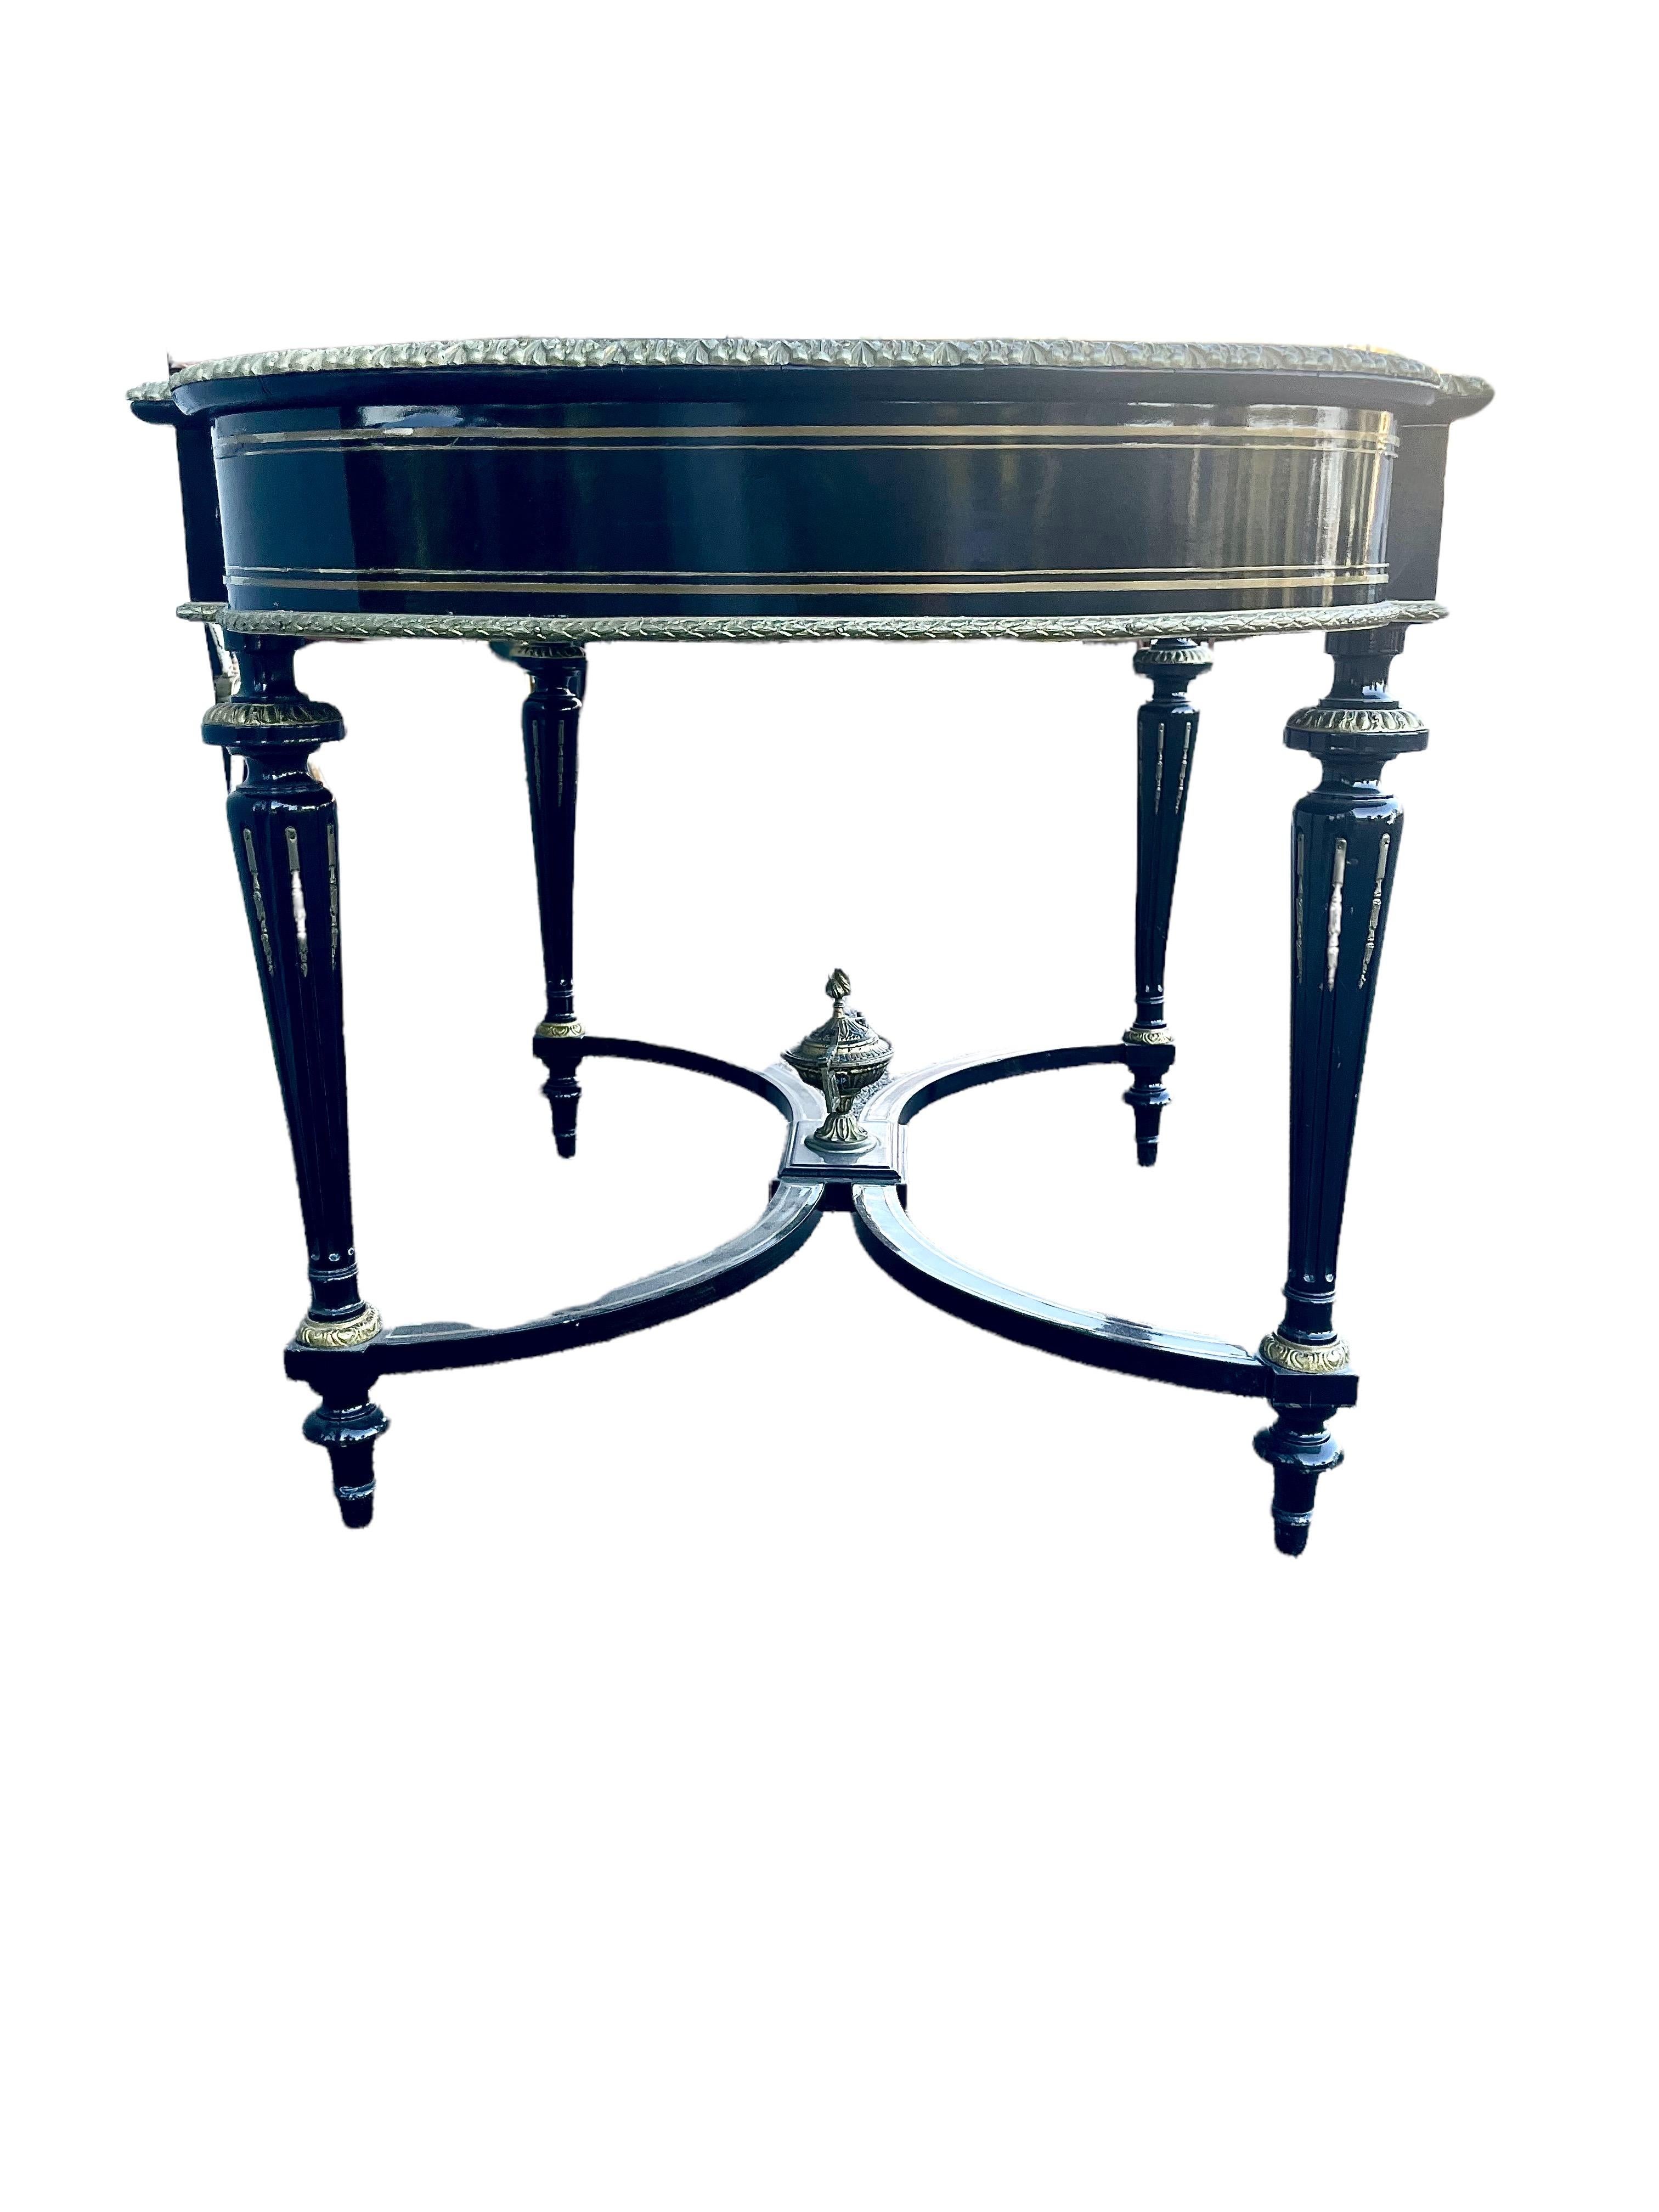 An imposing Napoleon III center table (or 'Table de Milieu') in ebonized fruit wood, rectangular in shape, with rounded sides. 
Its ornate top, which is bordered all around with a gilt bronze frieze and two further inner bands, features at its